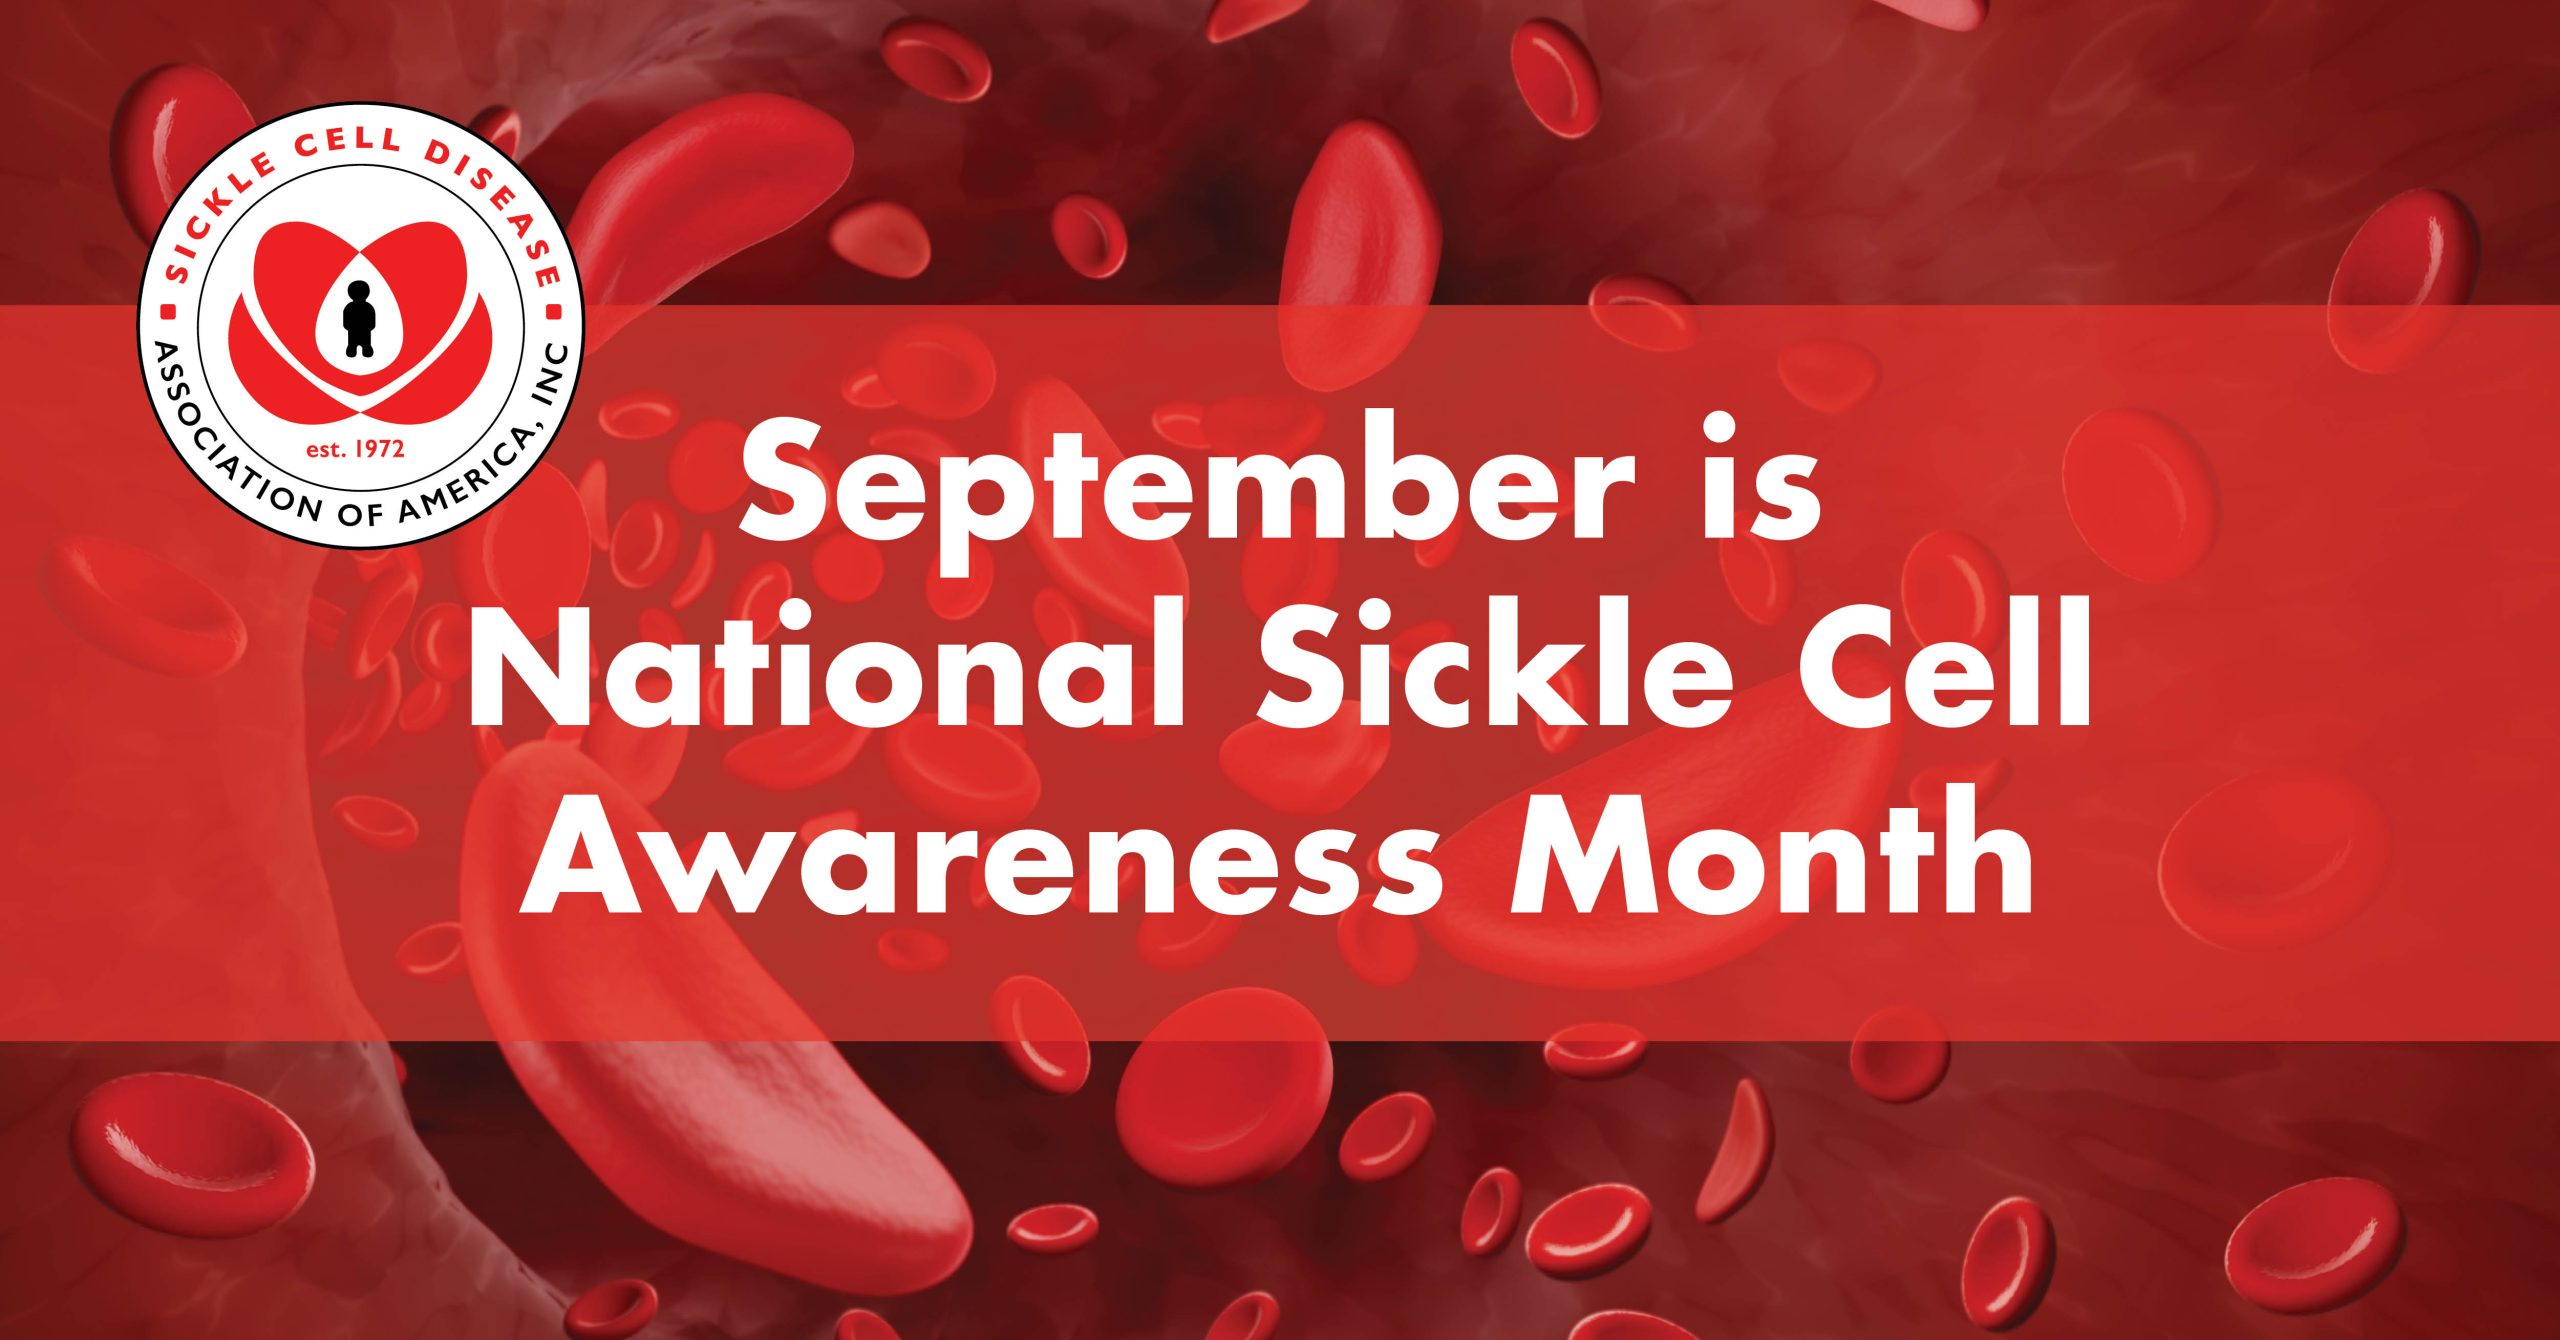 September is National Sickle Cell Awareness Month graphic